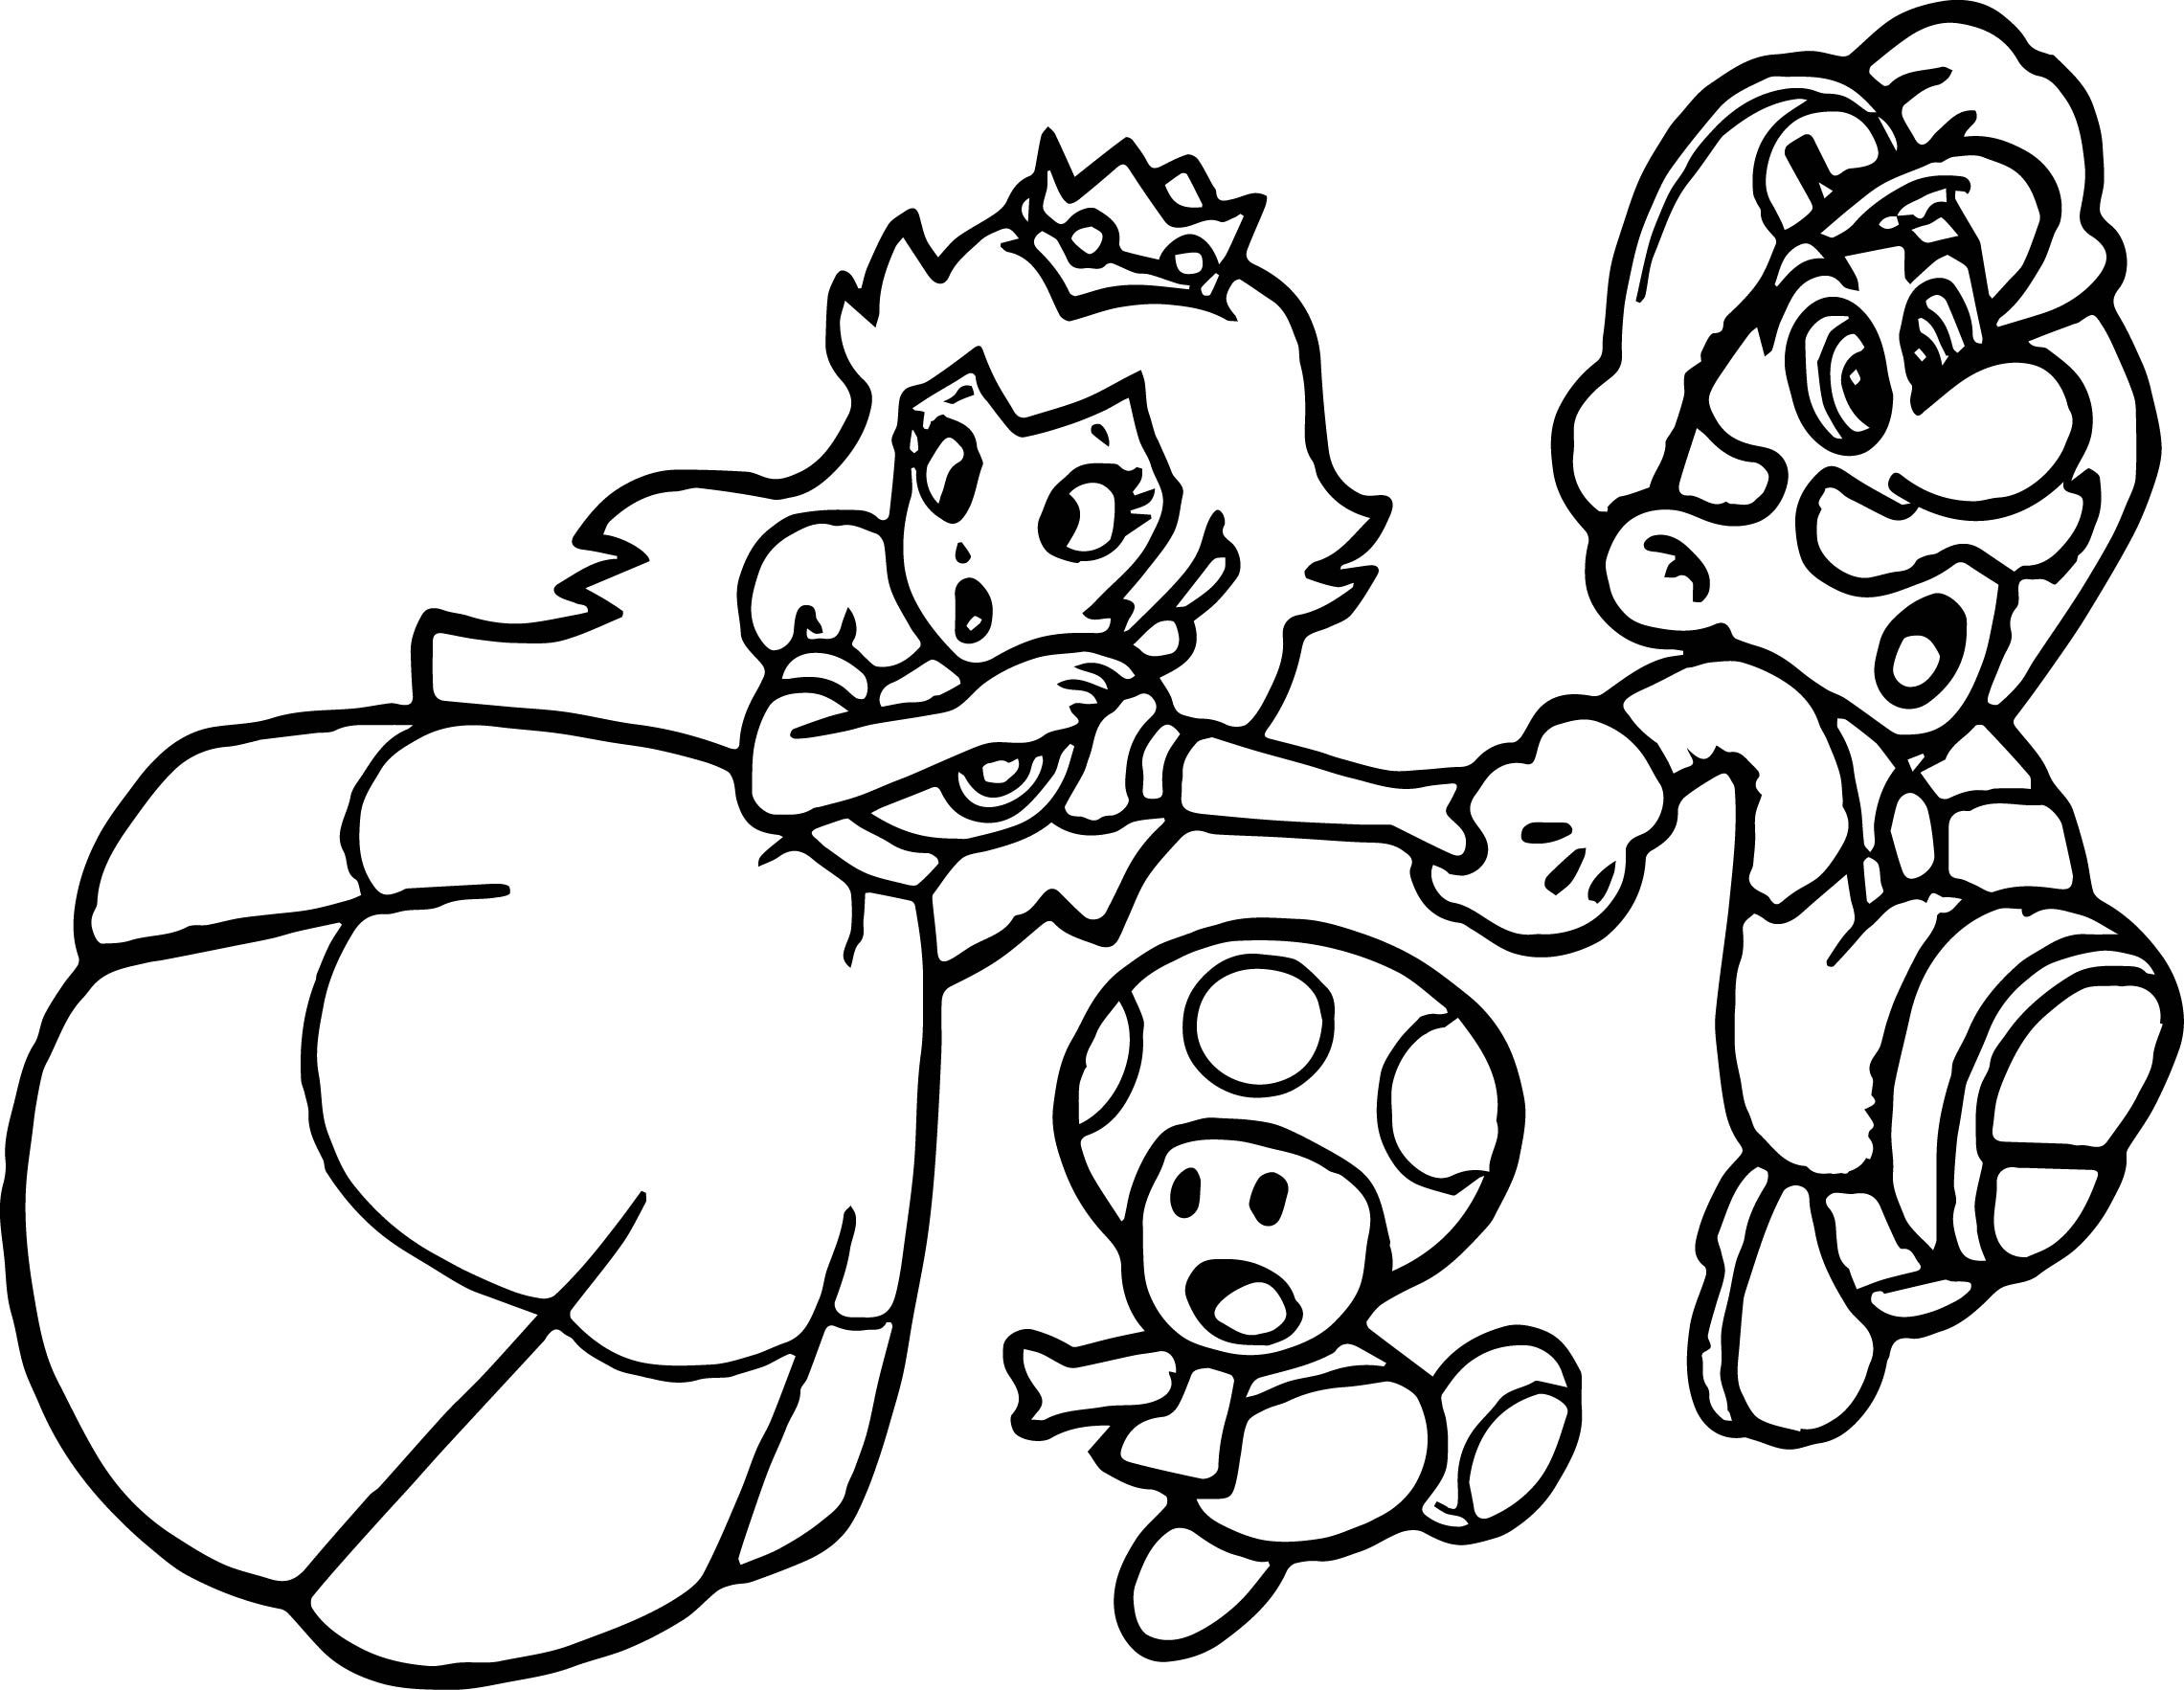 Super Mario Princess Mushroom Coloring Page With Pages Yoshi Colouring  Odyssey Bros Kart Party Pictures Free Printable And Luigi To — oguchionyewu